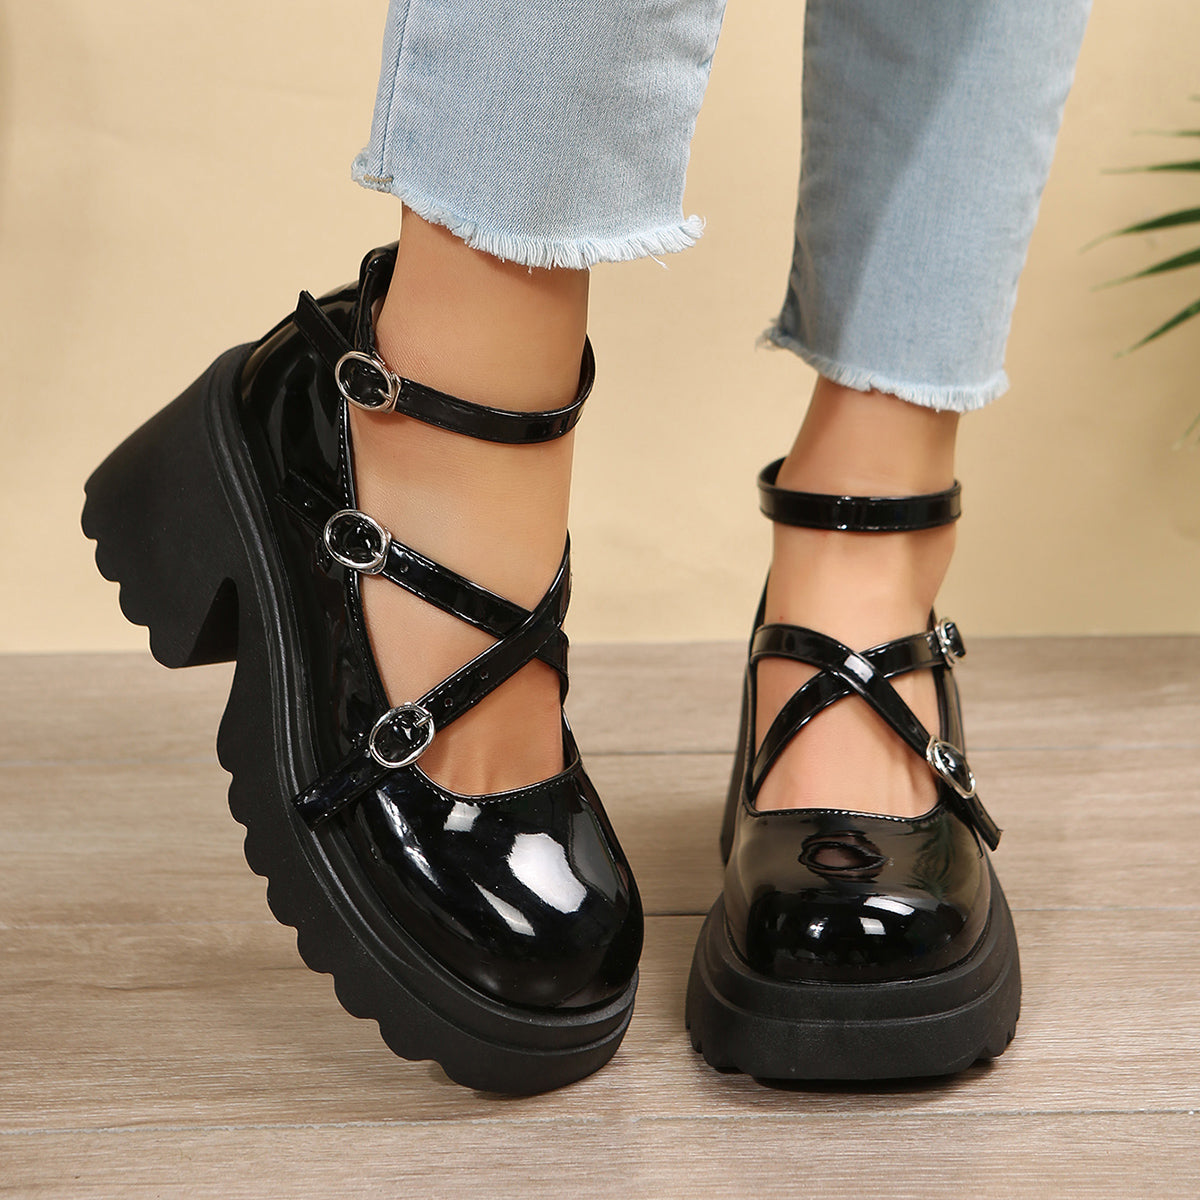 Doubled- the Double Strap Patent Vinyl Platform Mary Jane Shoes